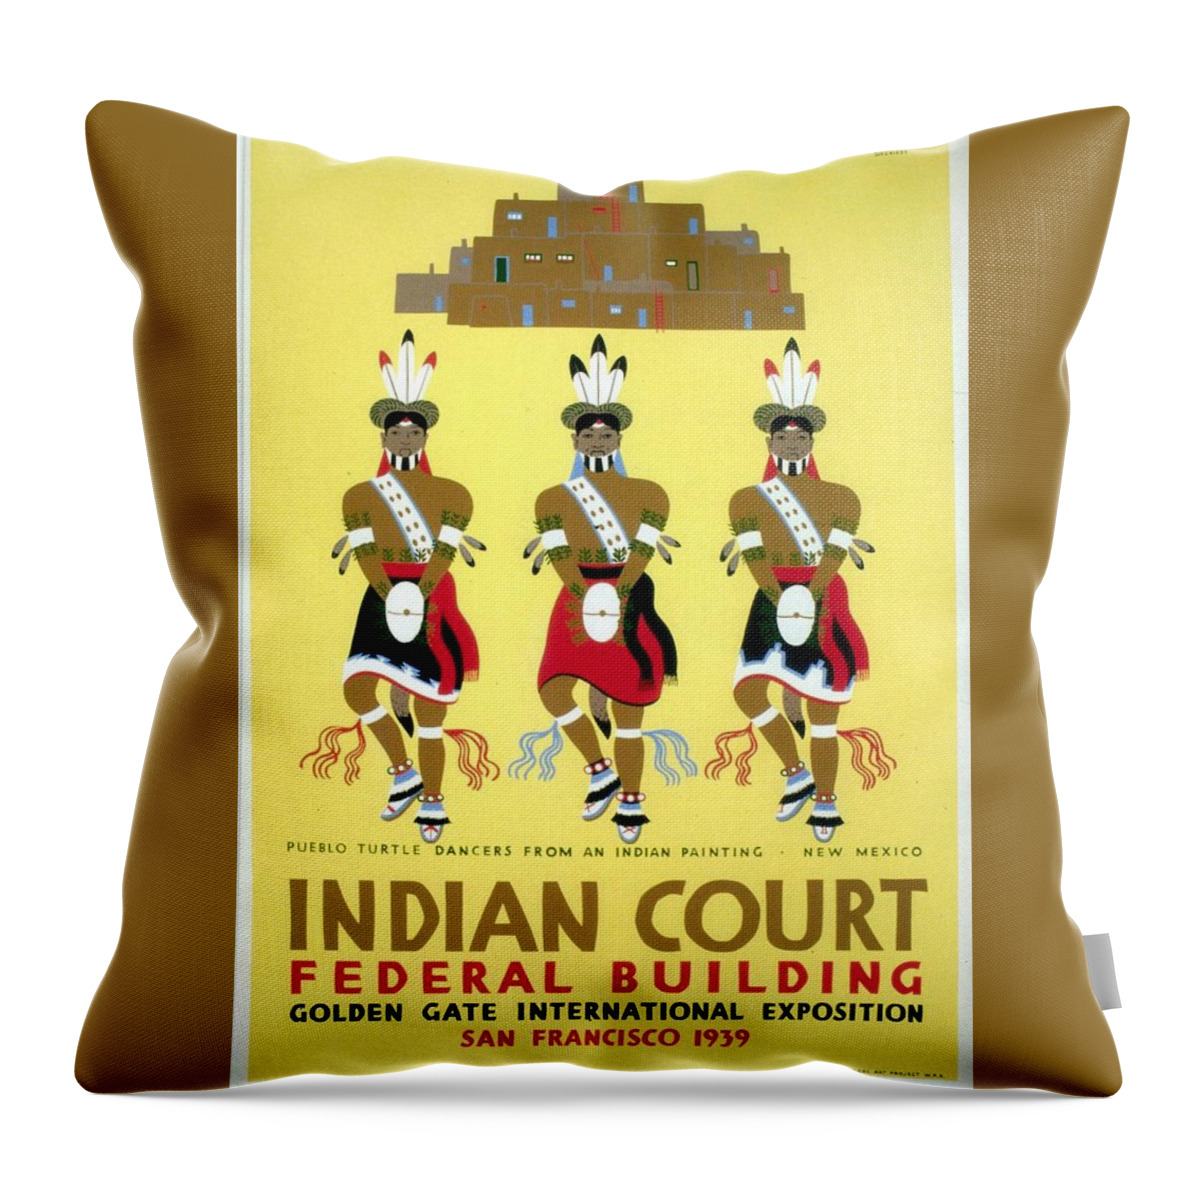 Indian Court Throw Pillow featuring the painting Indian Court - Golden Gate International Exposition, San Francisco - Vintage Poster by Studio Grafiikka